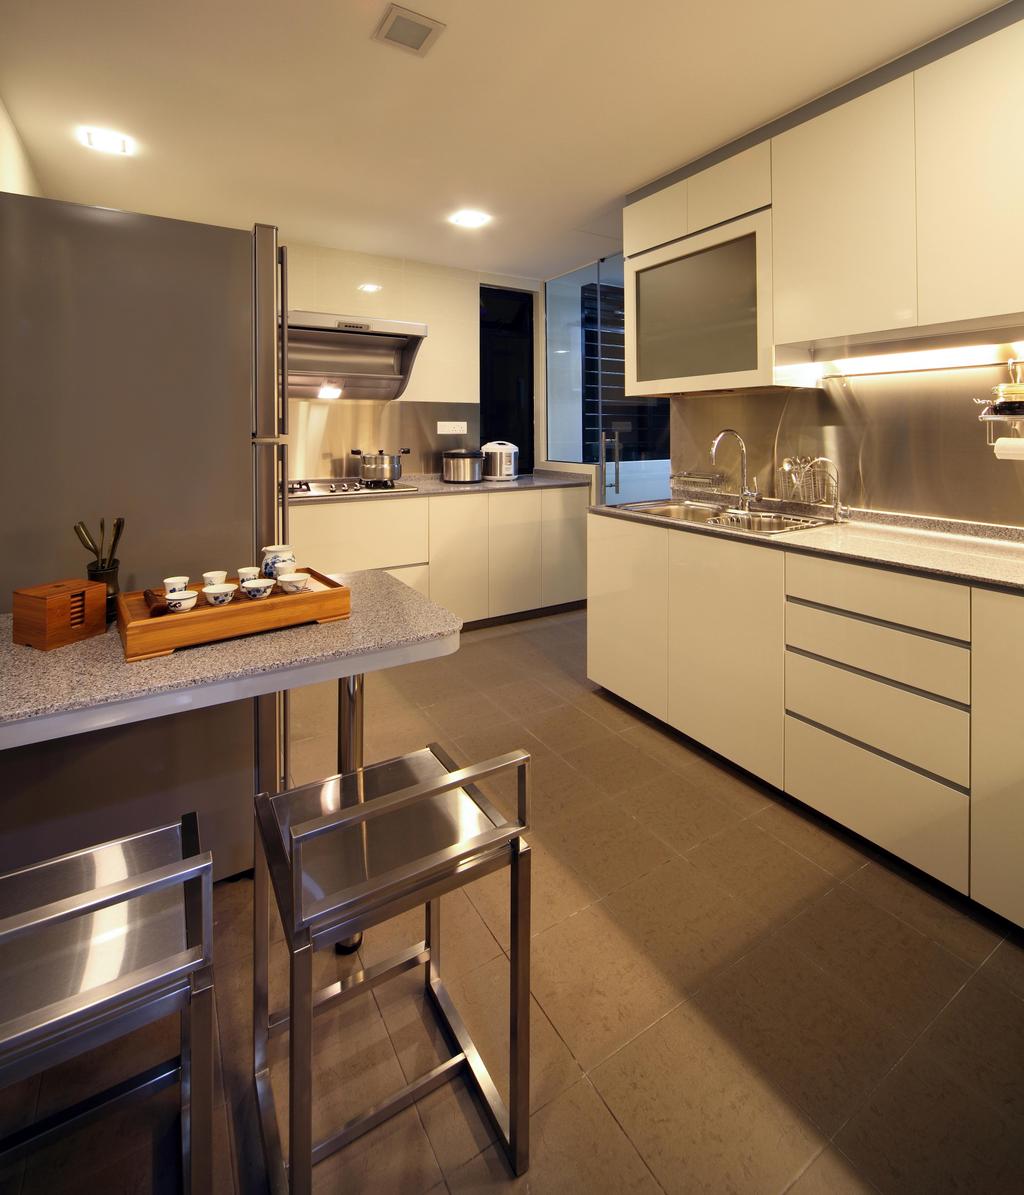 Transitional, Condo, Kitchen, Mergui Road (Block 81), Interior Designer, Boonsiew D'sign, Chair, Metallic, White Kitchen Cabinets, White, Tile, Tiles, Kitchen Countertop, Table, Indoors, Interior Design, Room, Appliance, Dishwasher, Electrical Device